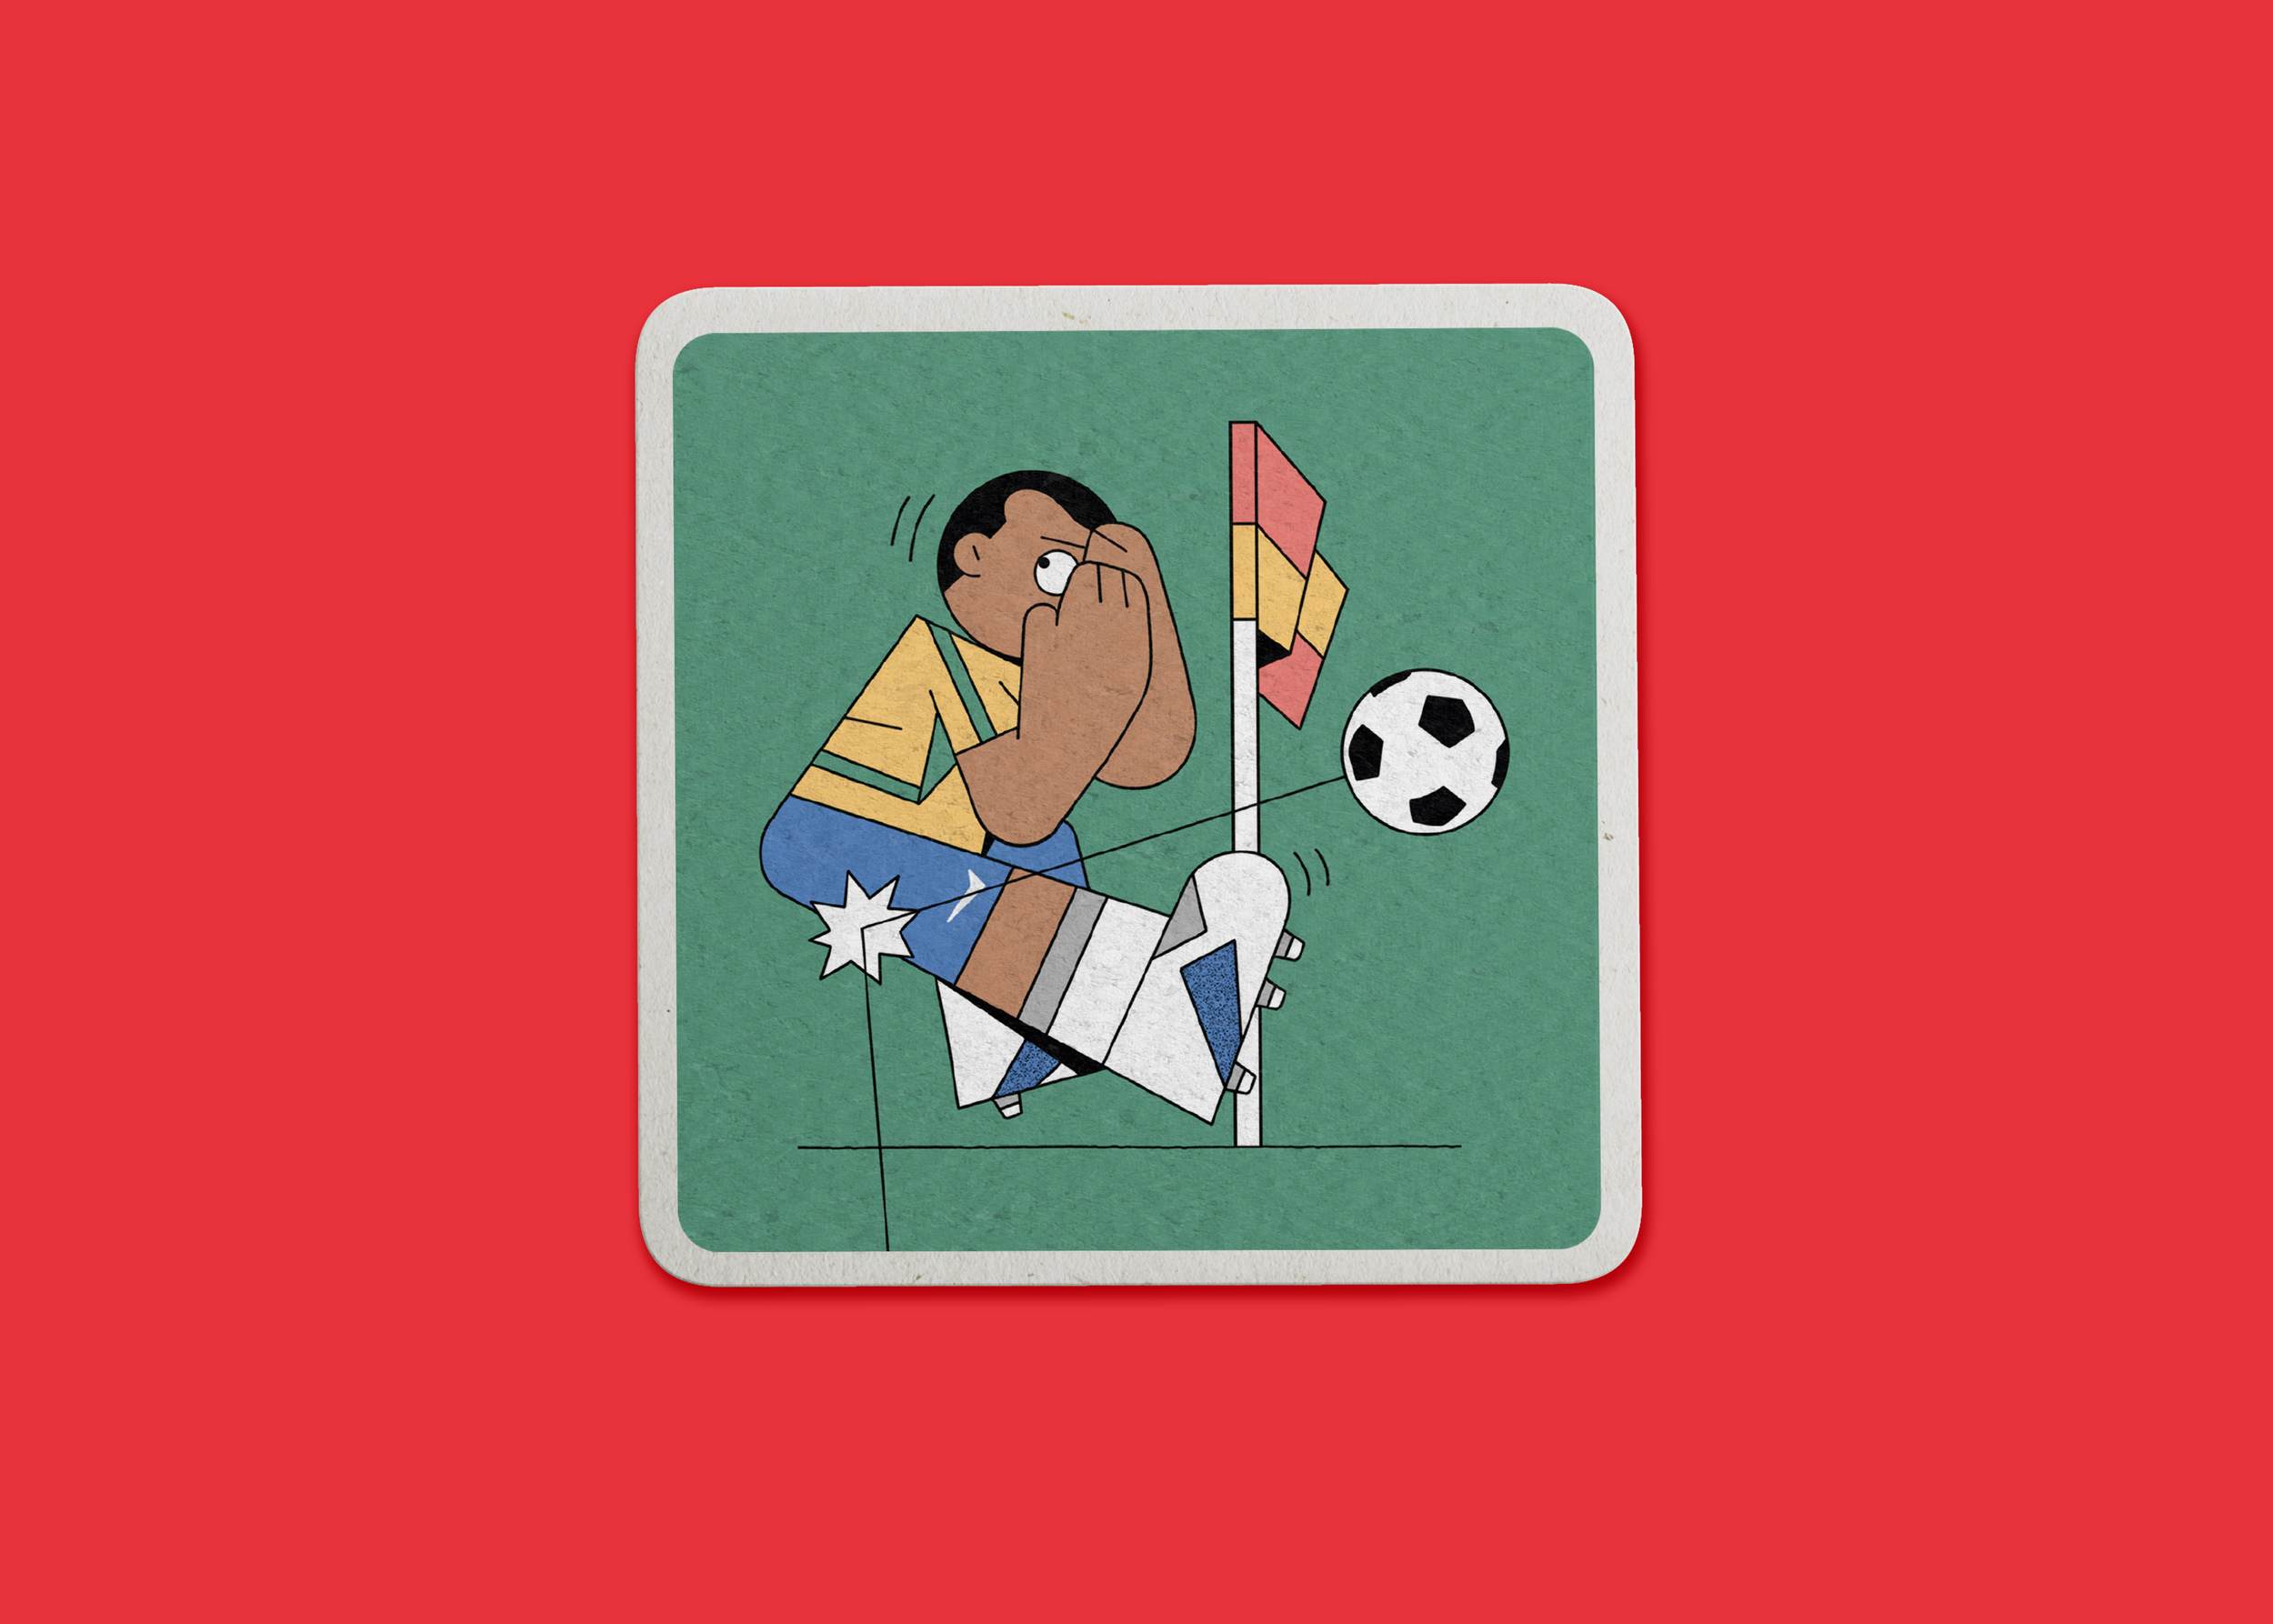 A World Cup-themed coaster